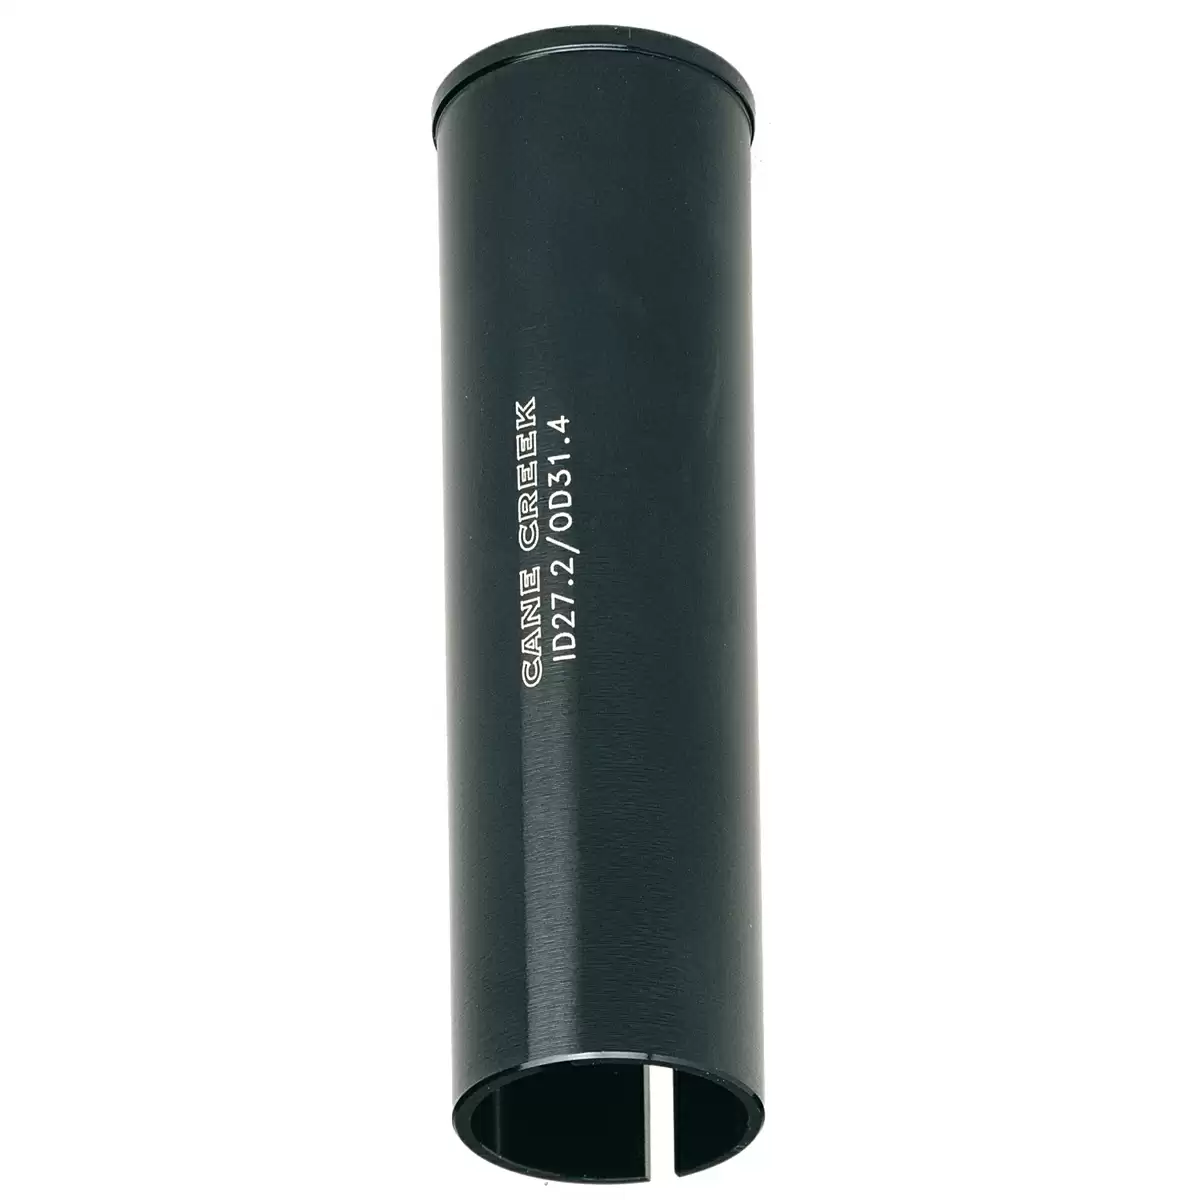 Seatpost adapter from 27.2mm to 30.4mm - image